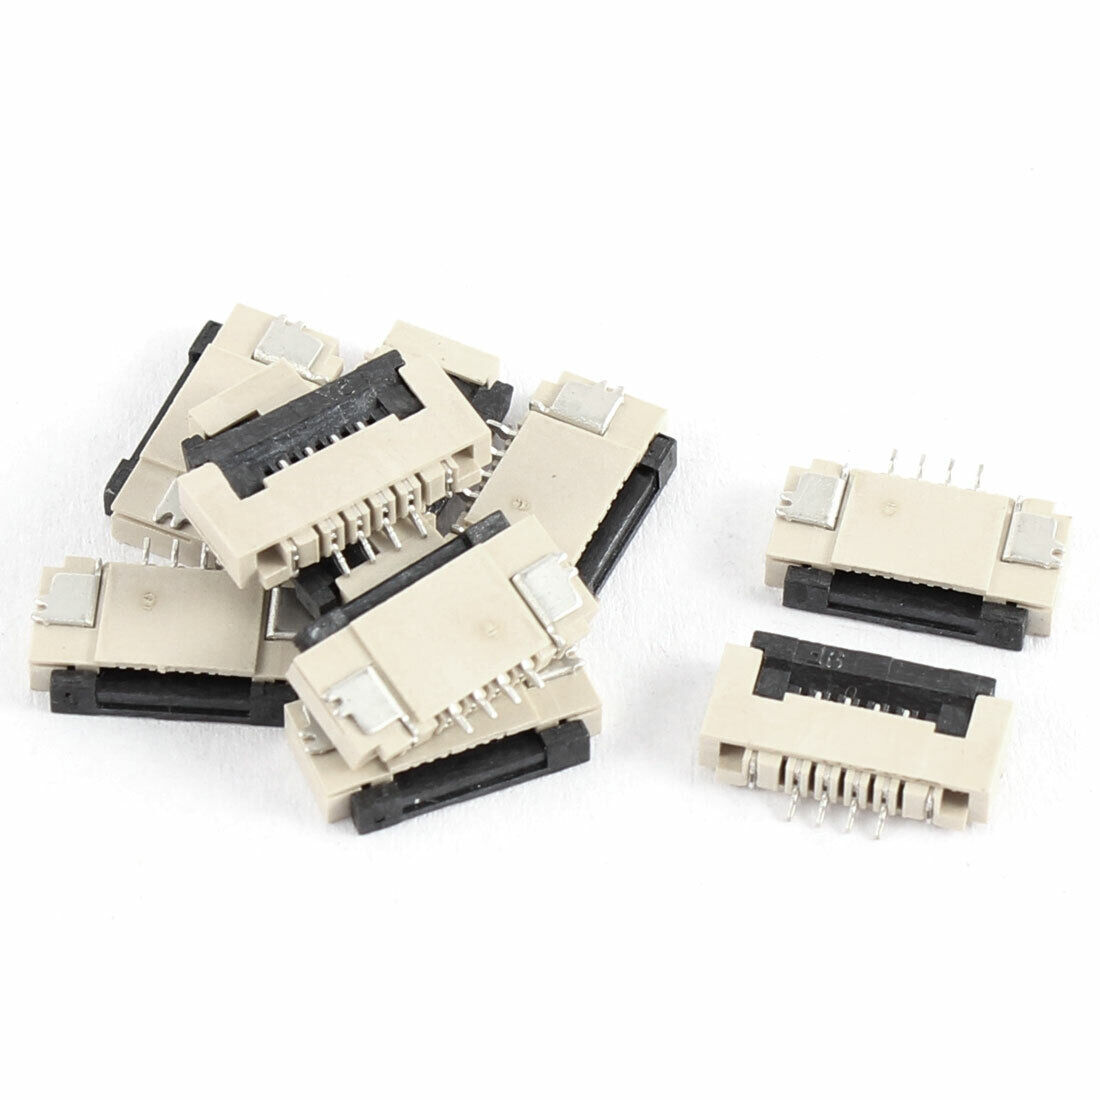 10Pcs Clamshell Type Bottom Port 4Pin 1.0mm Pitch FFC FPC Sockets Connector